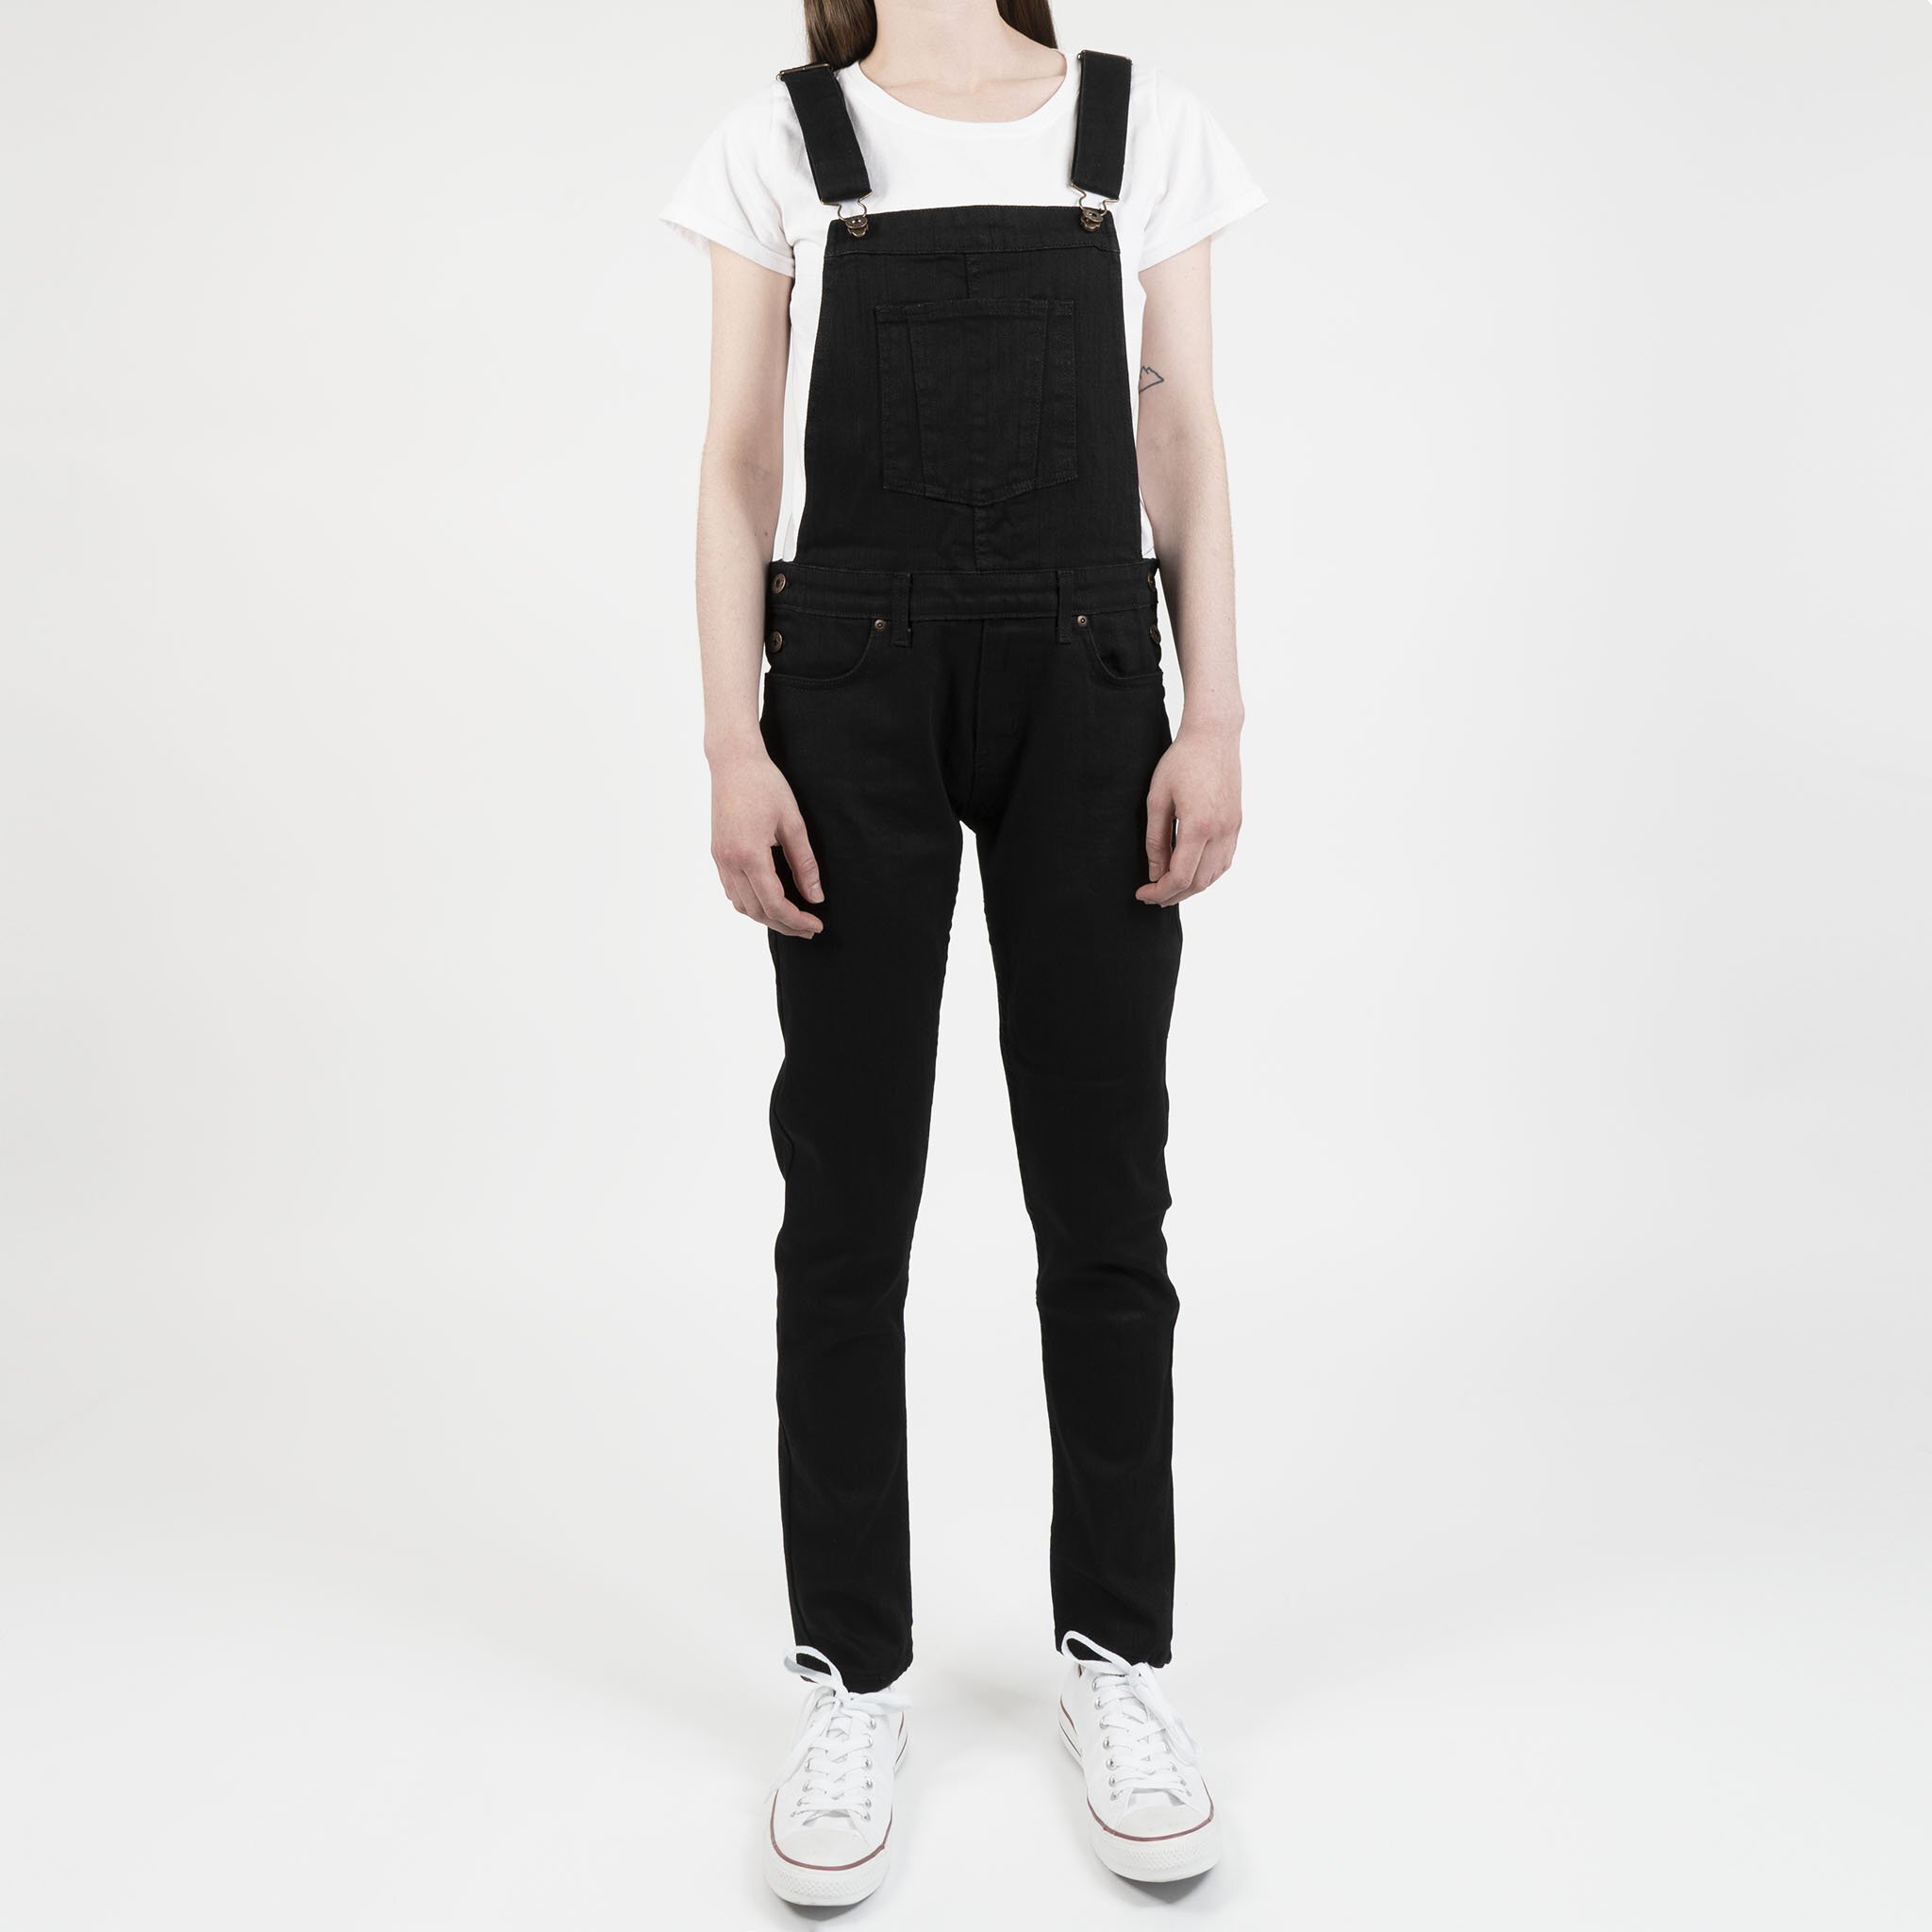  Women’s Overalls Black Power-Stretch - front 